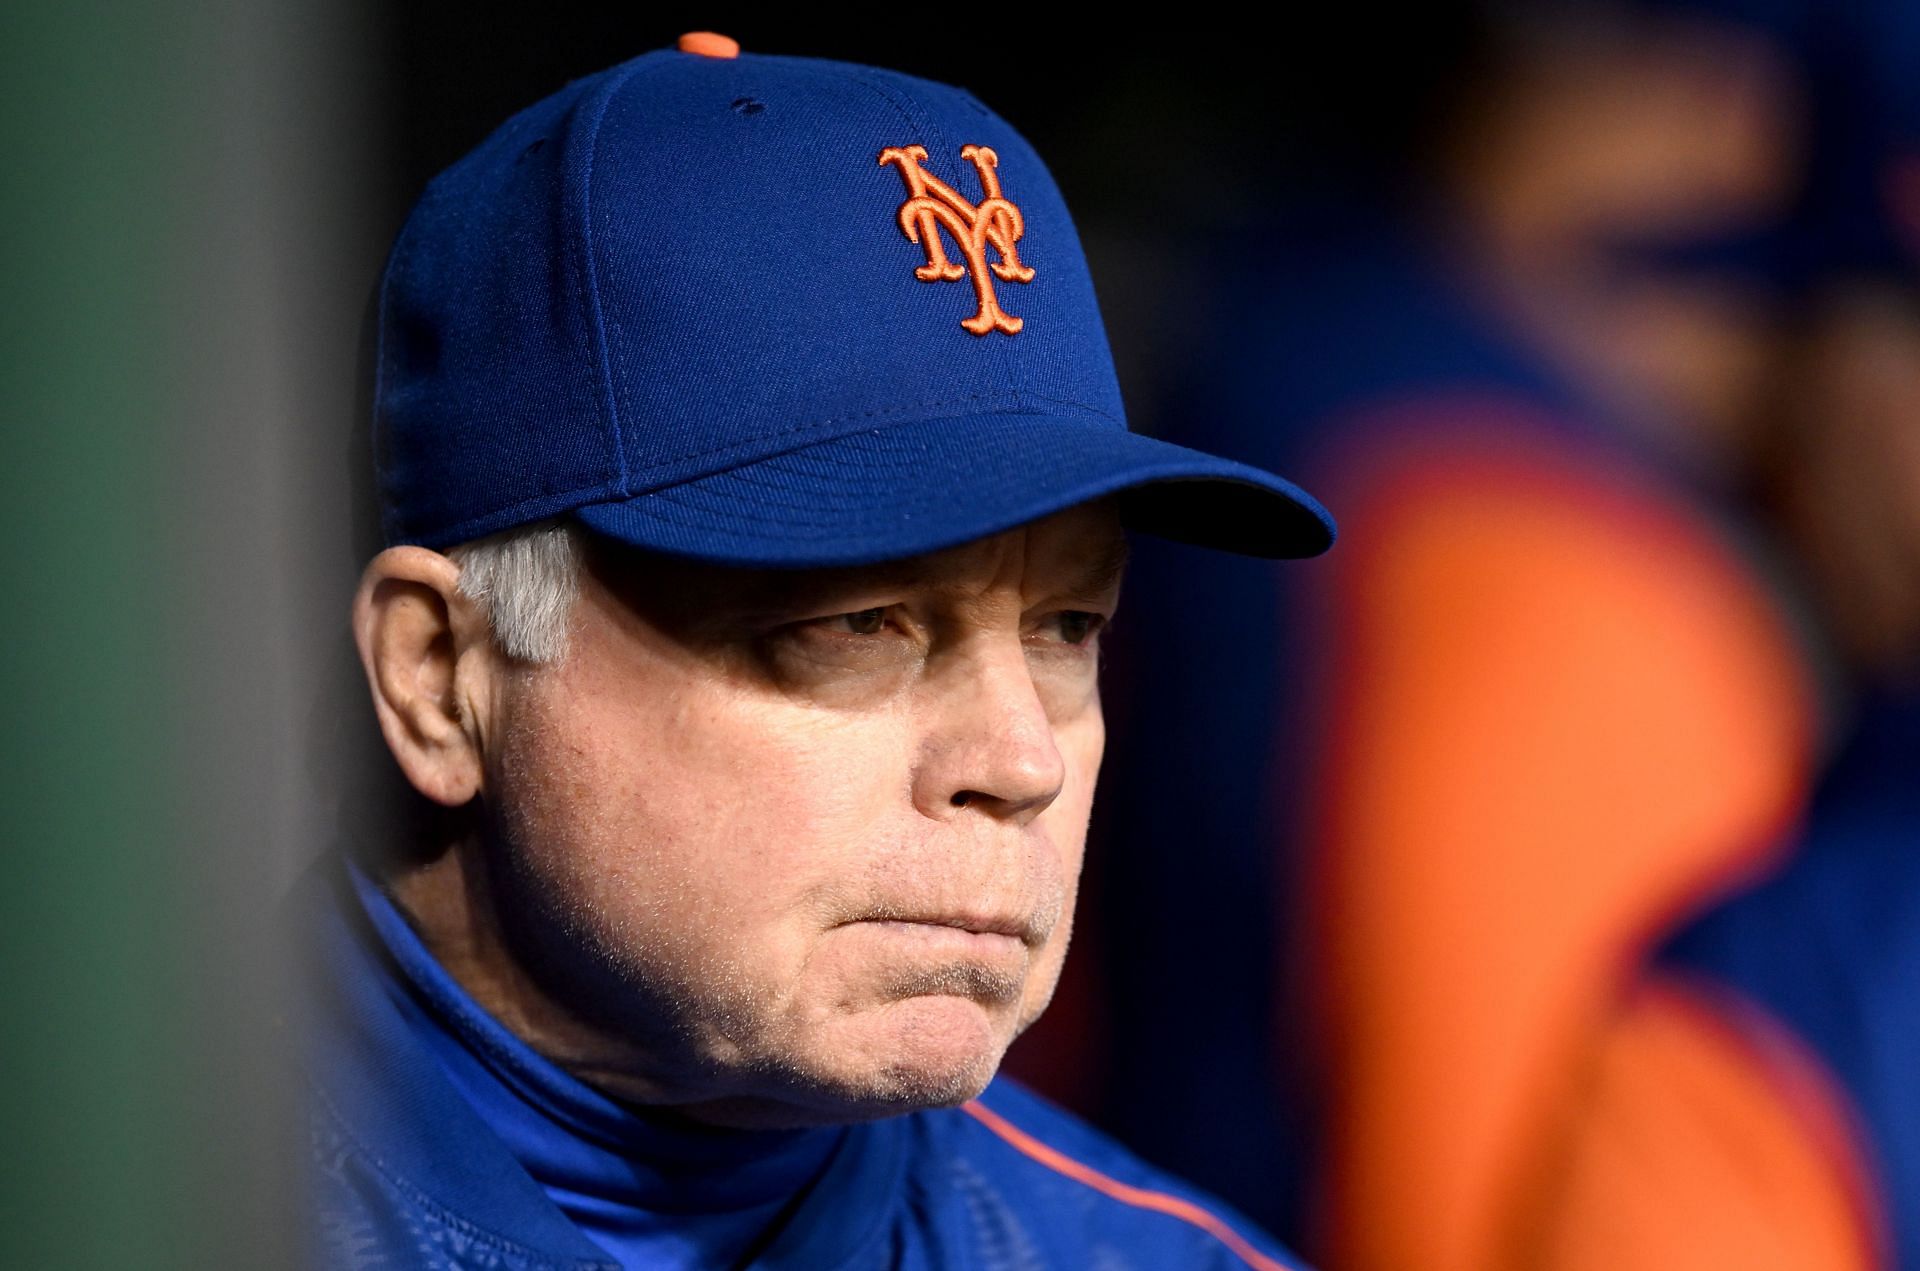 Ex-Mets pitcher tells whiny former teammates to shush after